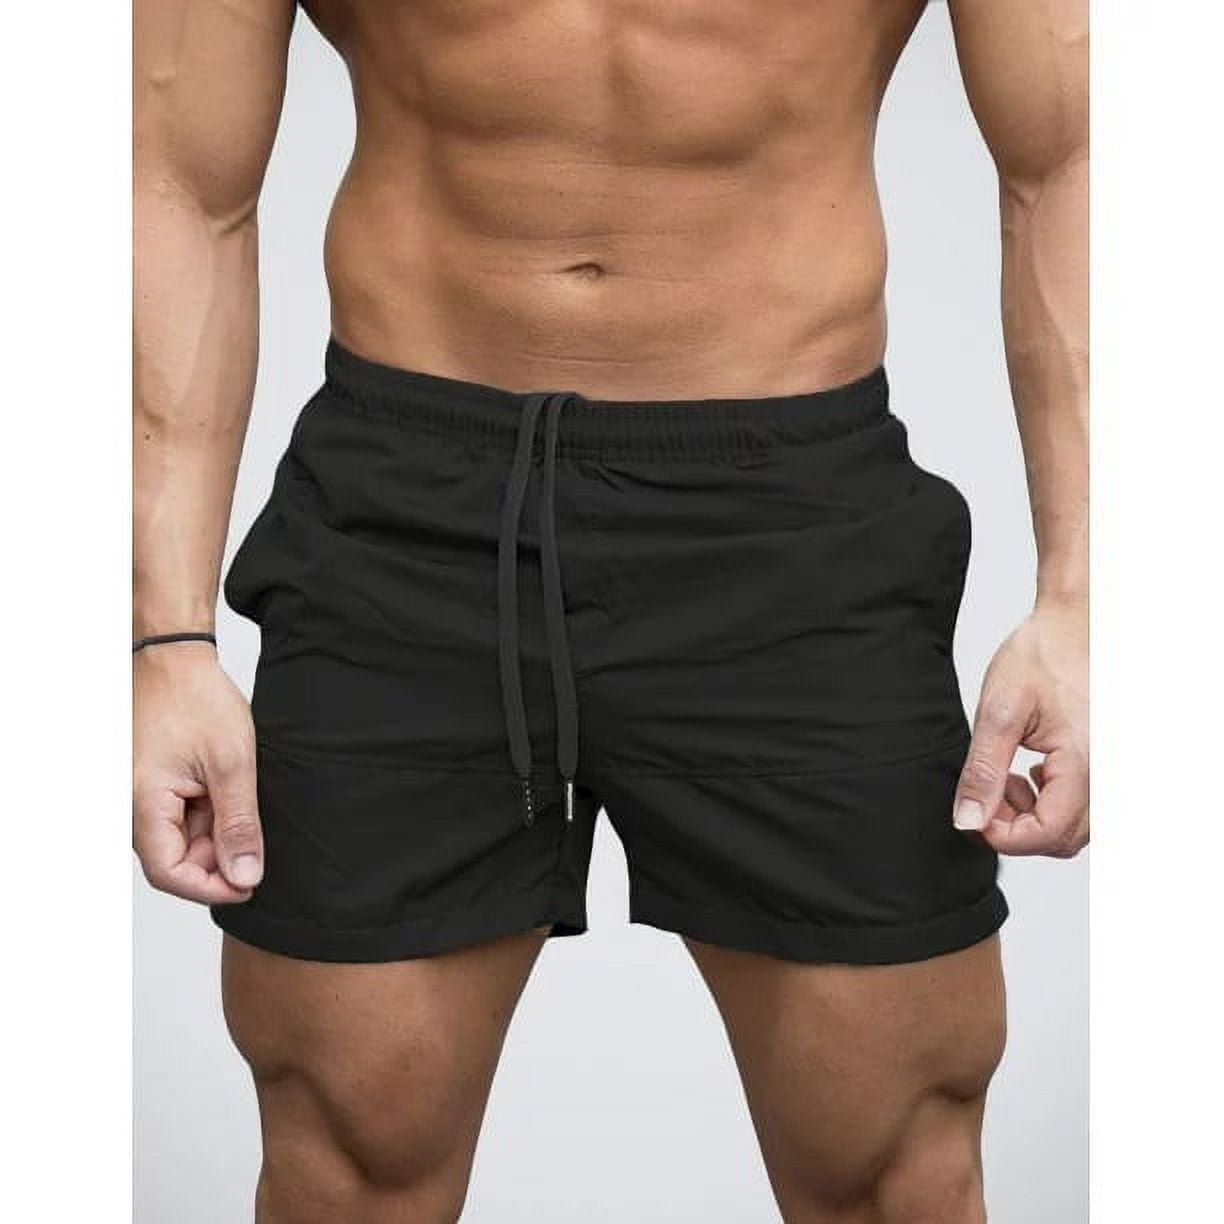 Summer Fitness Workout Running Shorts With Liner With Zip Pocket For Running,  Gym, Tennis, Basketball, Soccer And Training From Pavlion, $20.49 |  DHgate.Com